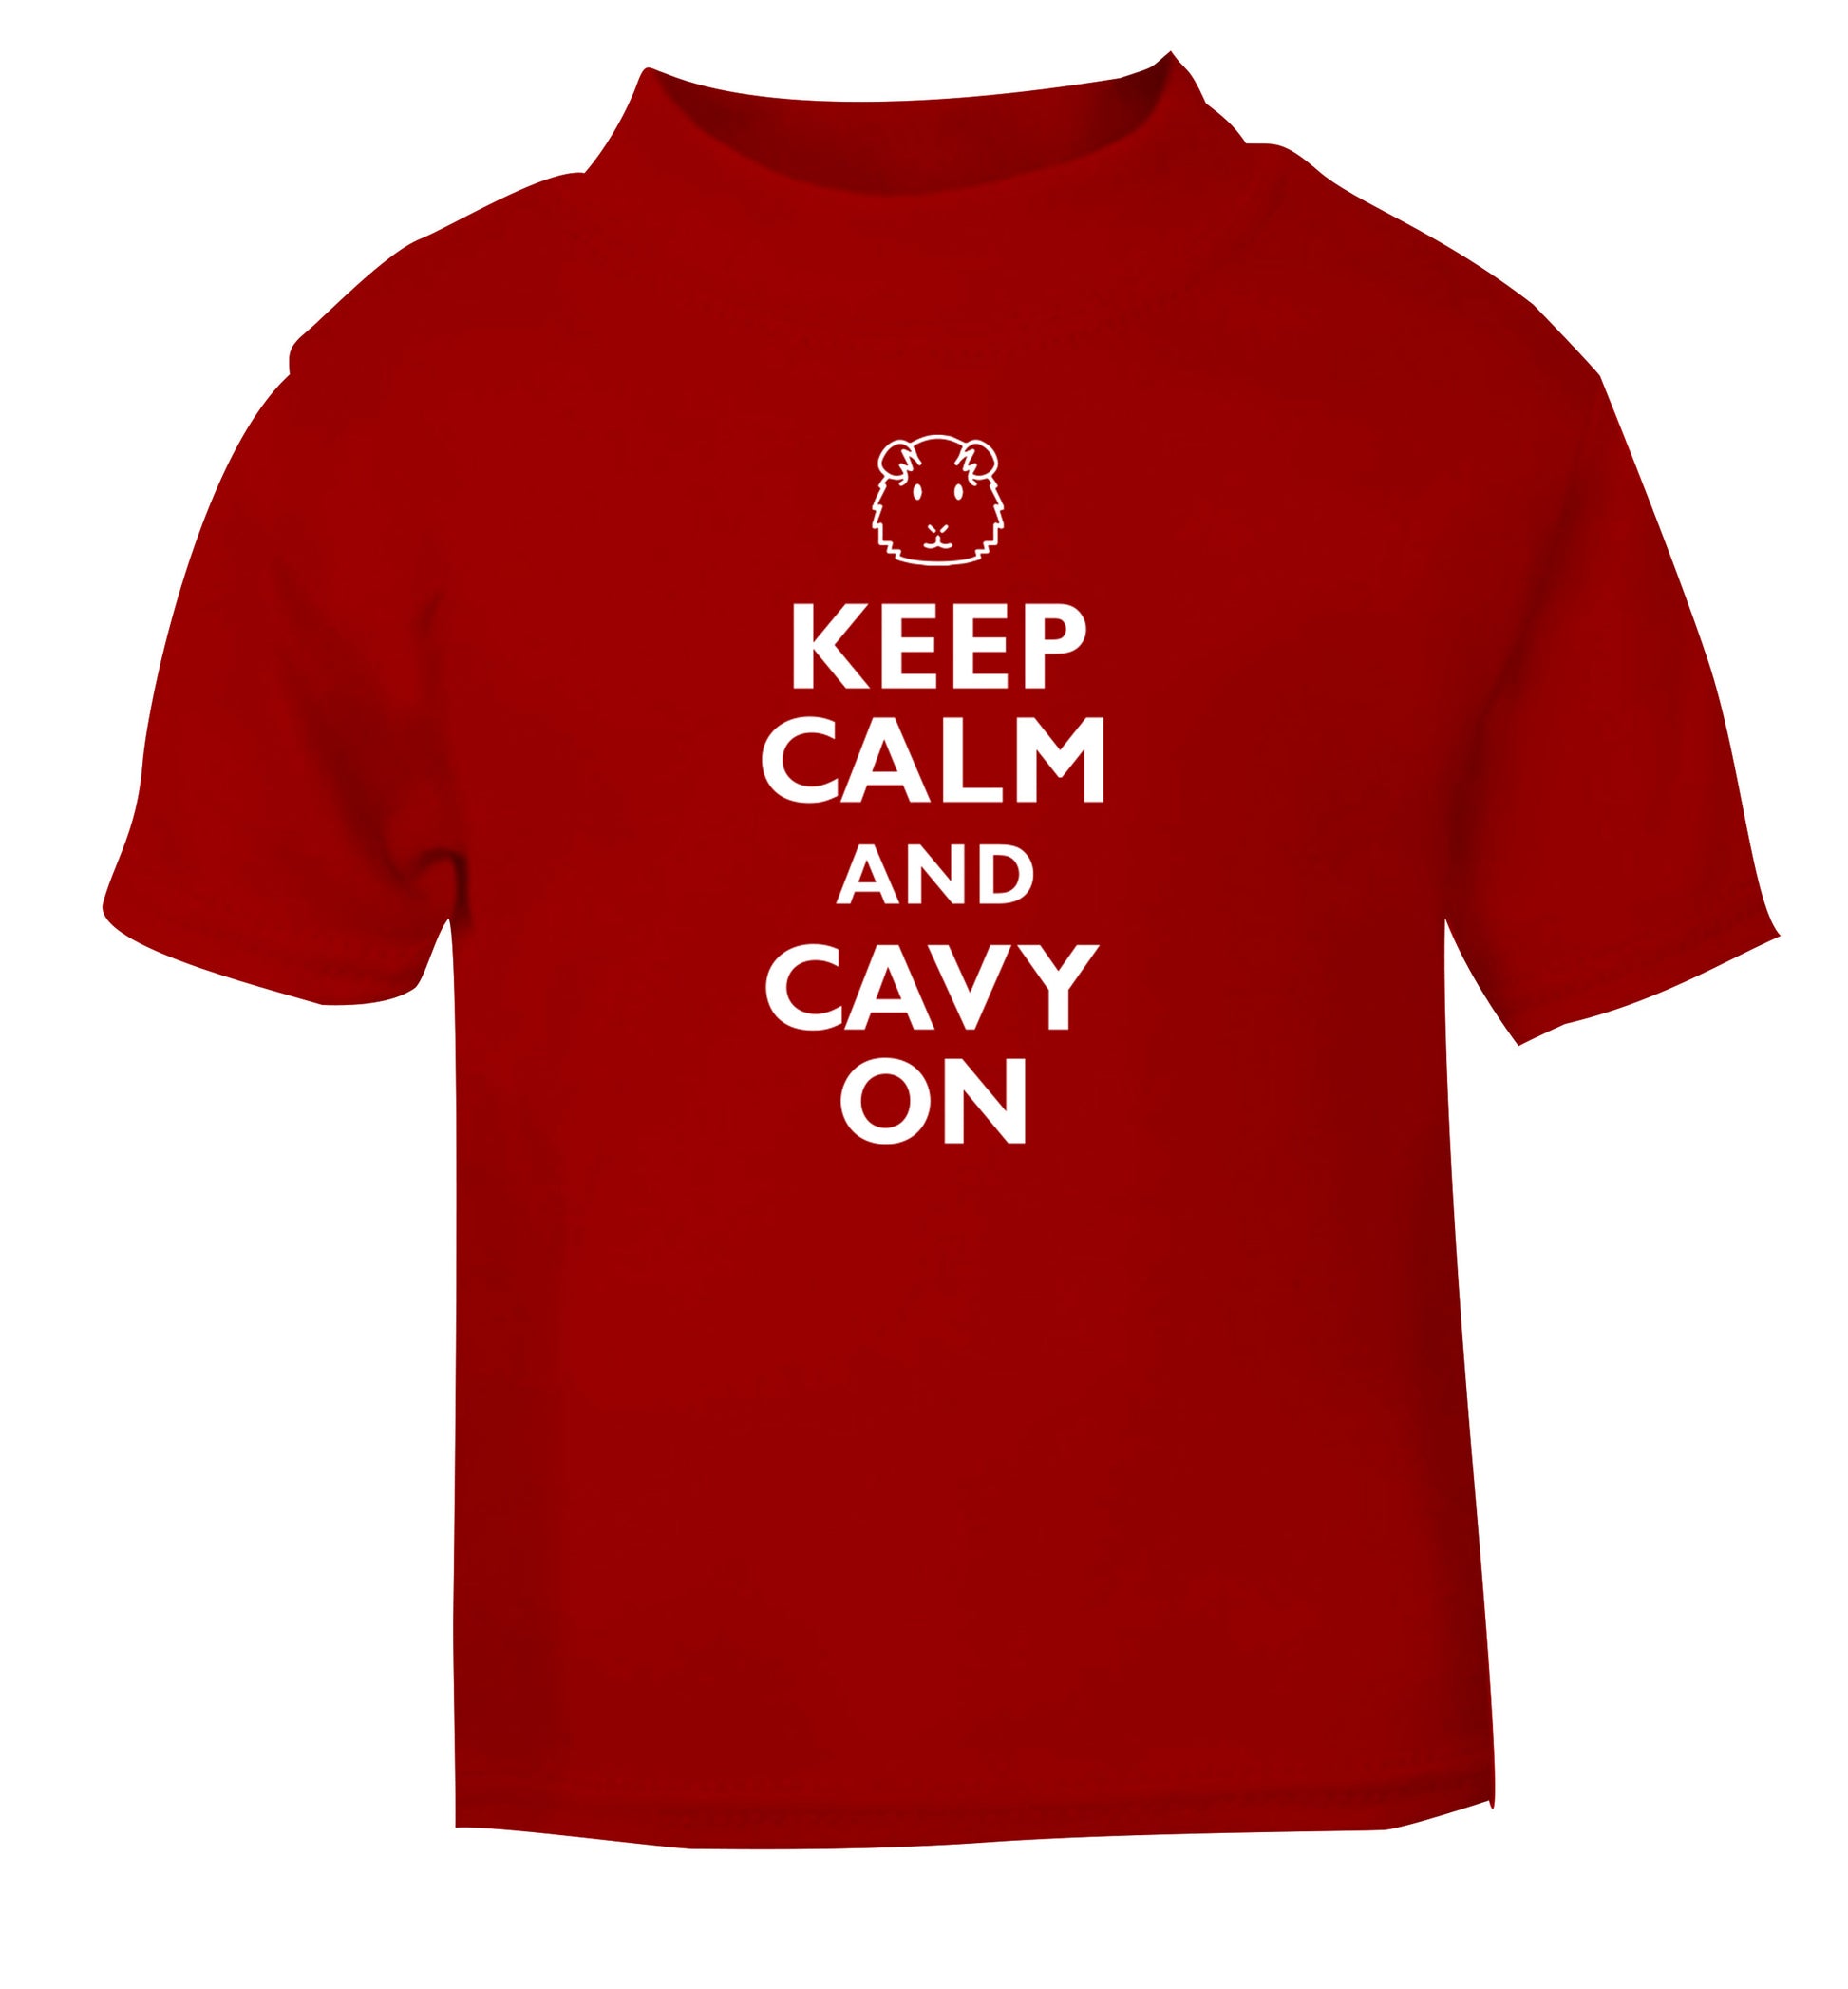 Keep calm and cavvy on red Baby Toddler Tshirt 2 Years